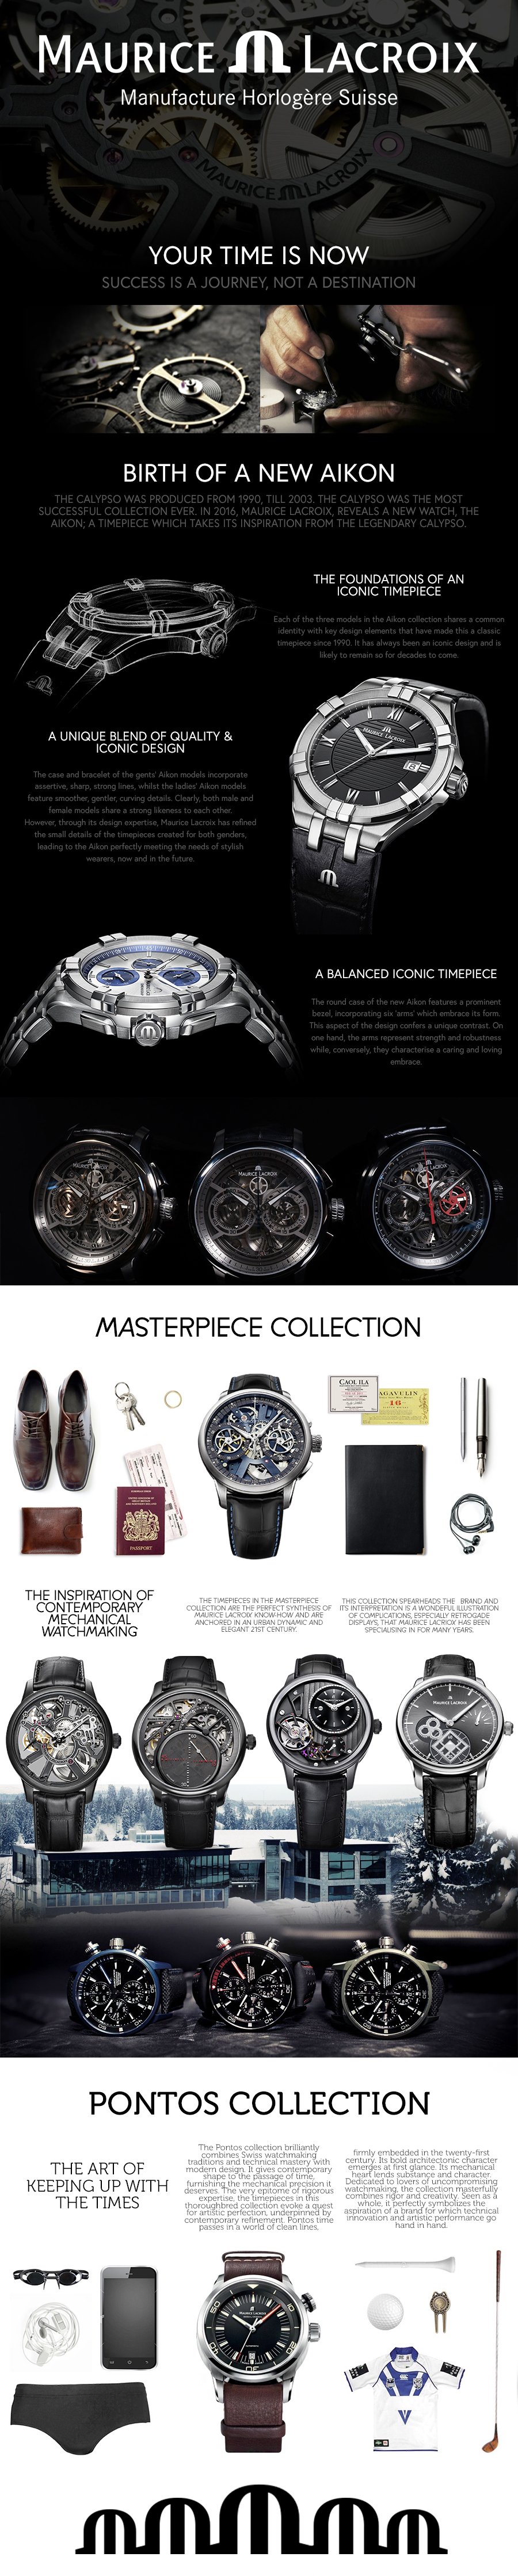 Maurice Lacroix's Collection - First Class Watches Blog